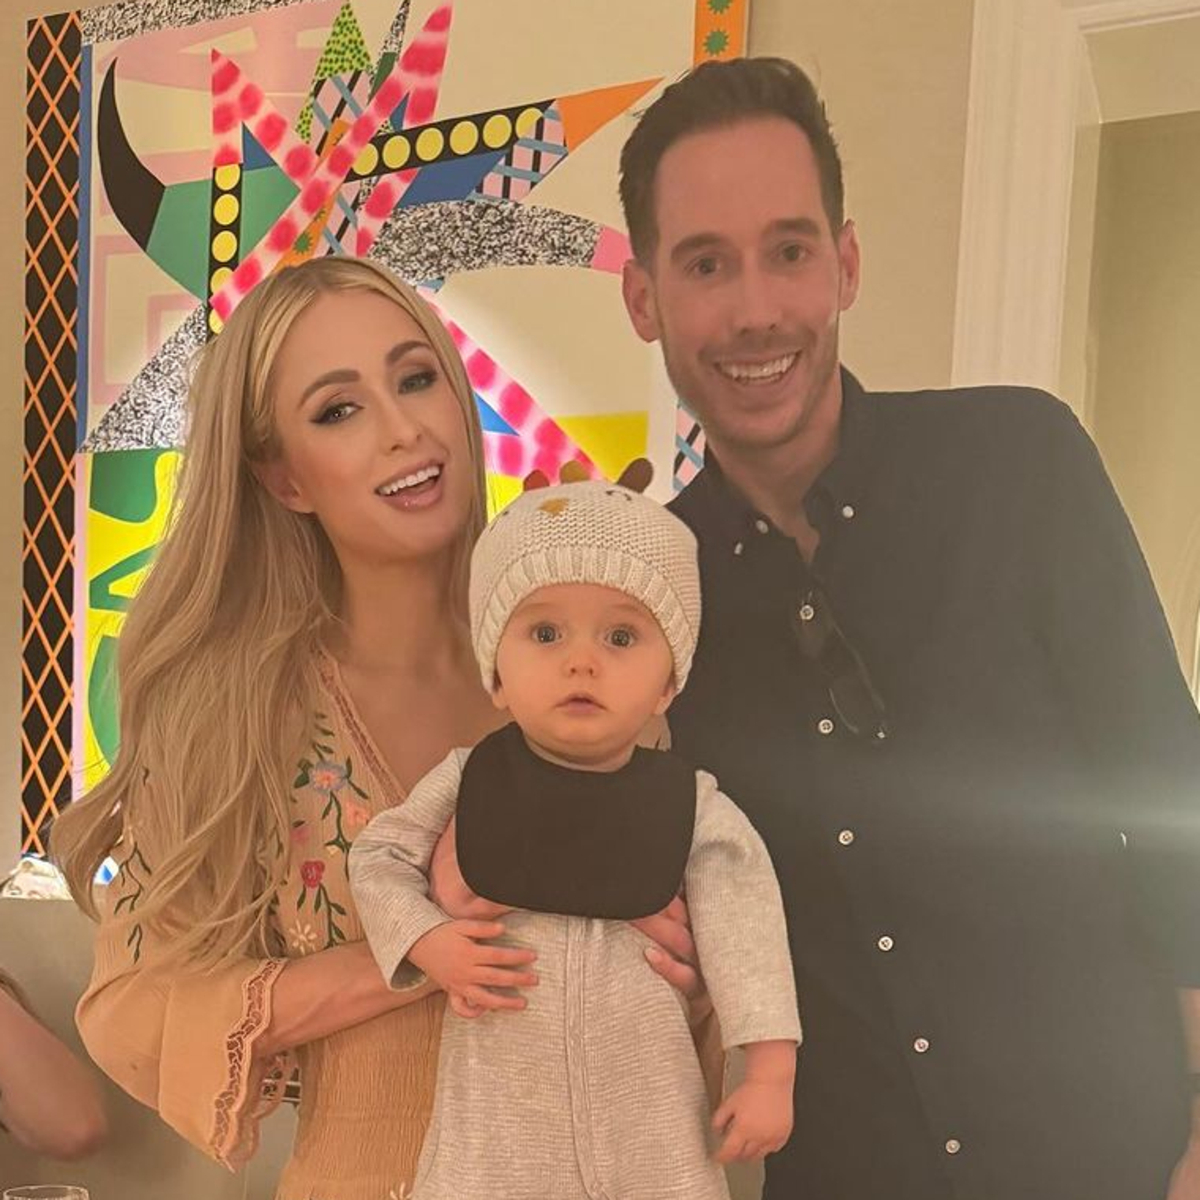 Why Paris Hilton’s World as a Mom of 2 Kids Is Simply the Sweetest